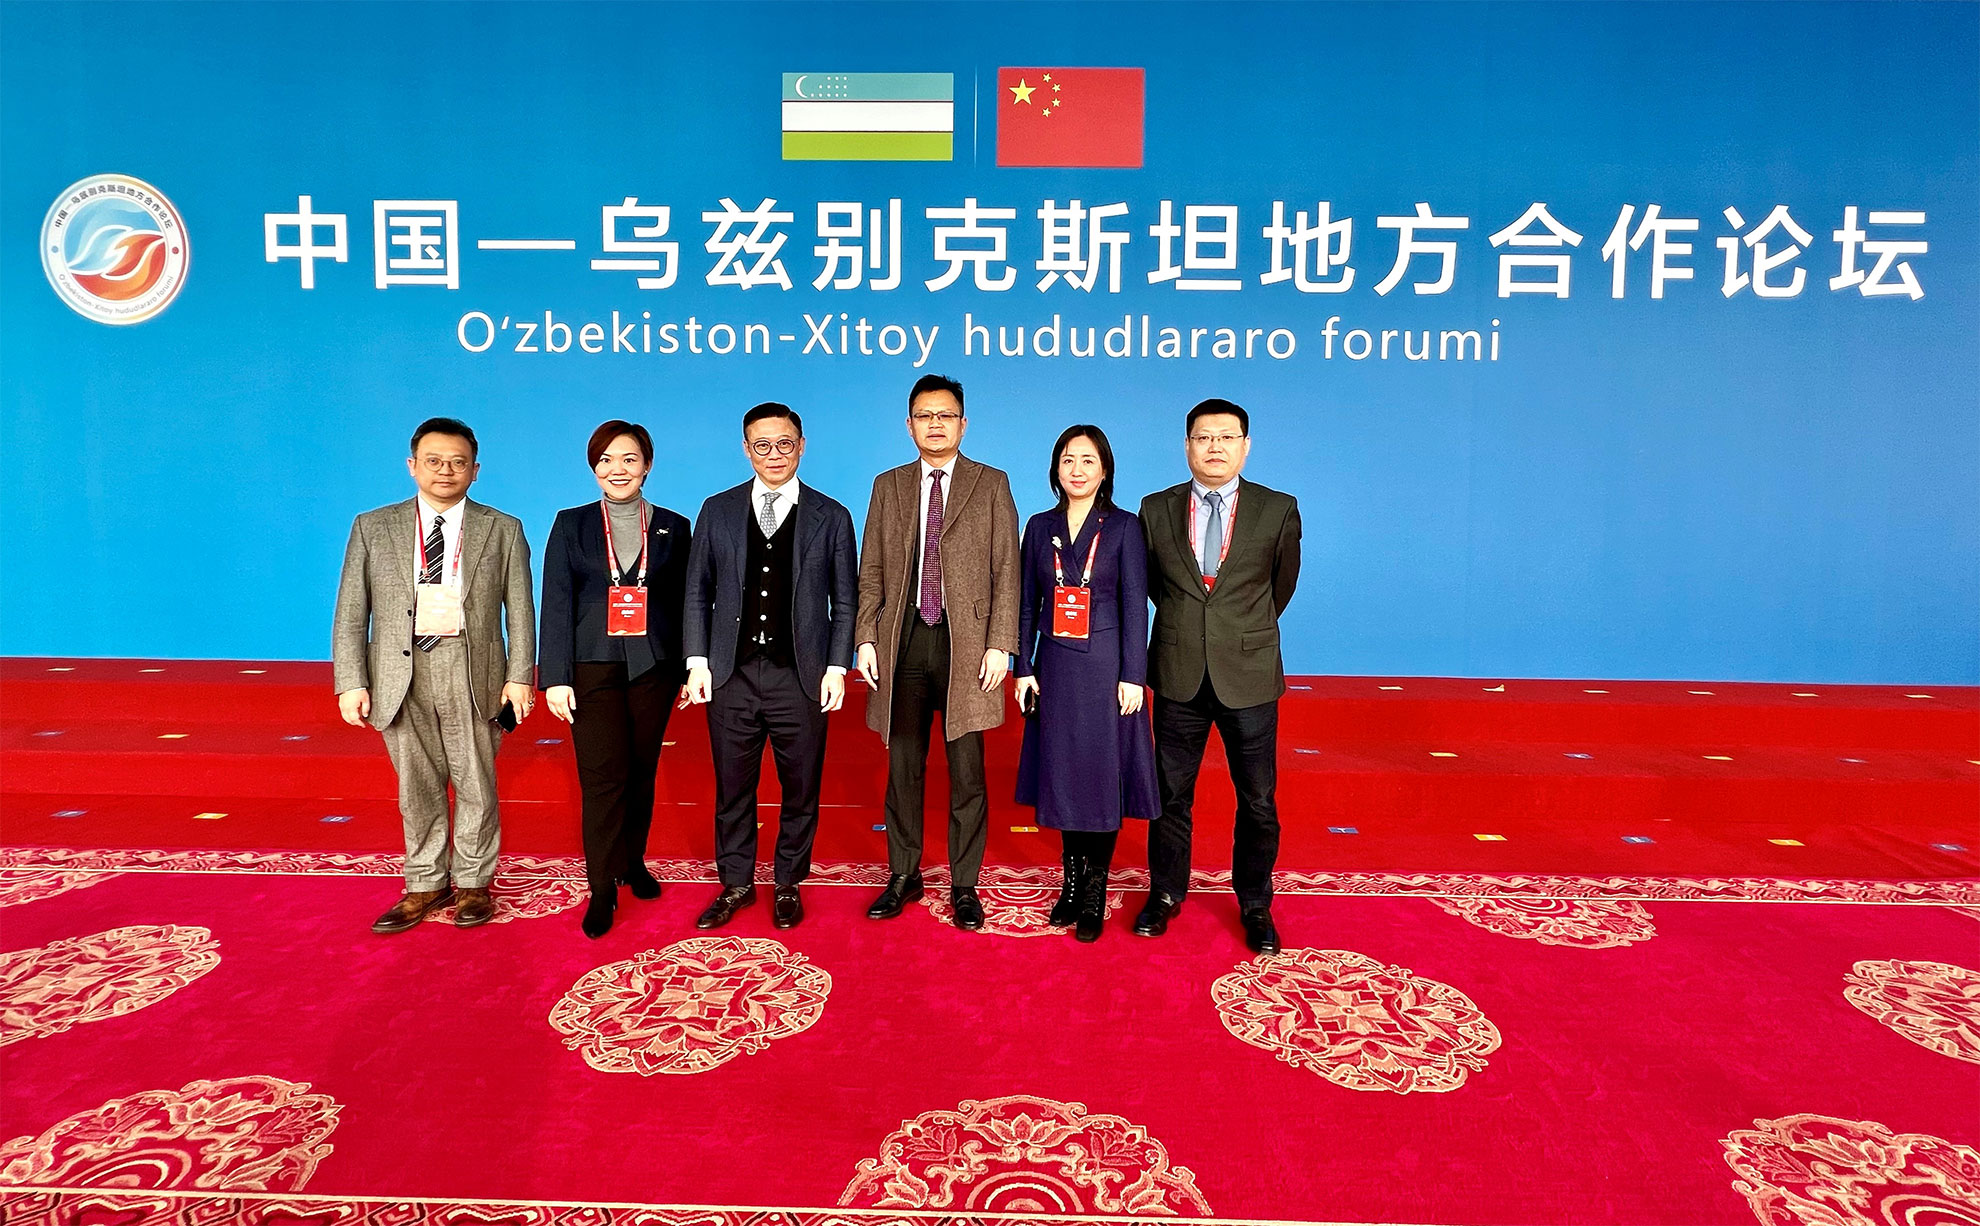 The Deputy Secretary for Justice, Mr Cheung Kwok-kwan, led a Hong Kong Special Administrative Region delegation to participate in a forum on China-Uzbekistan co-operation in Urumqi, Xinjiang today (January 22). Photo shows Mr Cheung (third left) and members of the delegation at the forum.